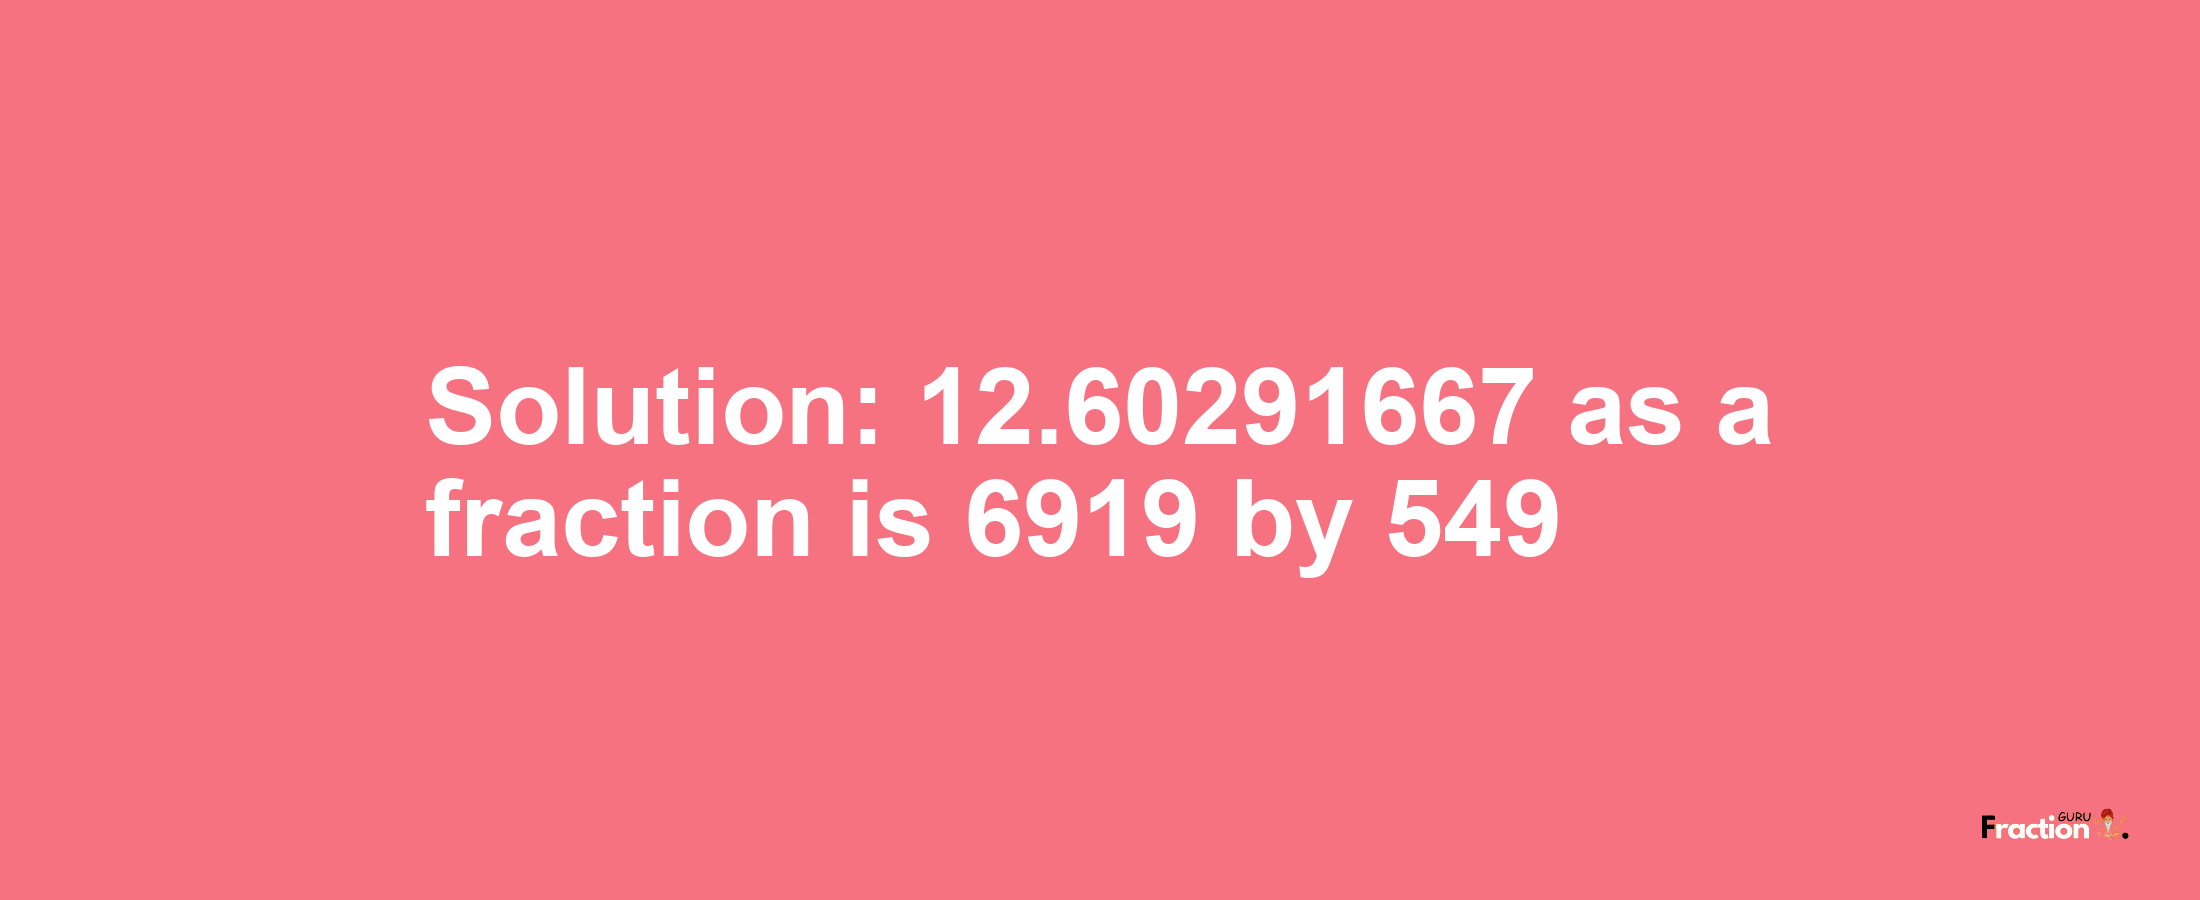 Solution:12.60291667 as a fraction is 6919/549